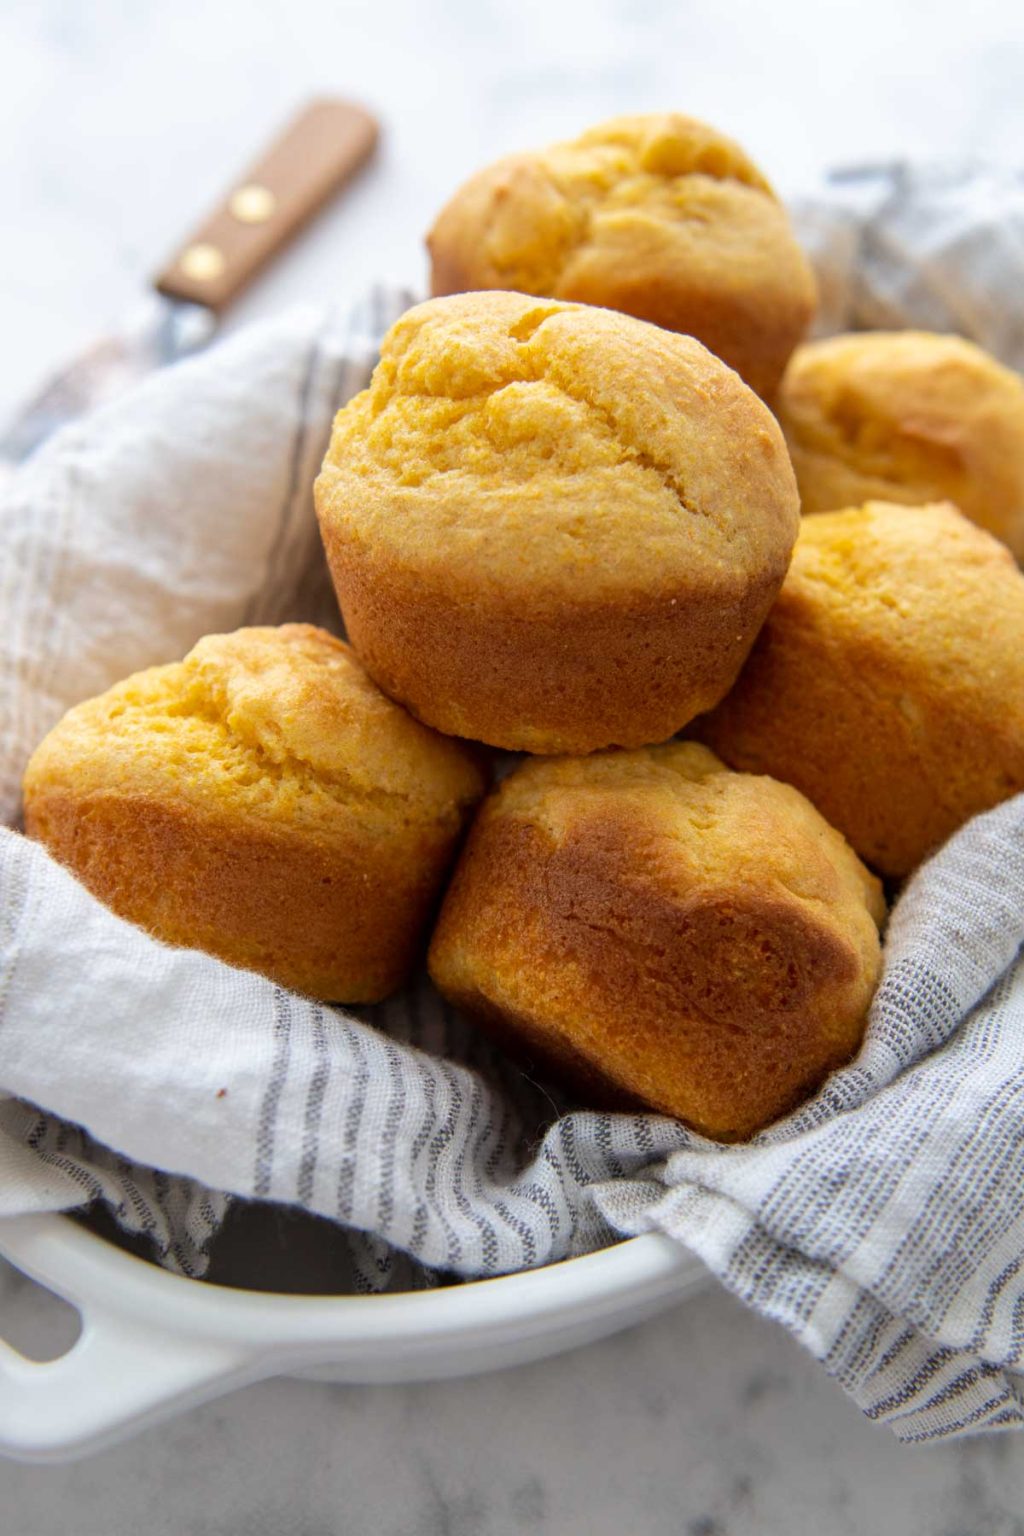 a basket of corn muffins lined with a white towel